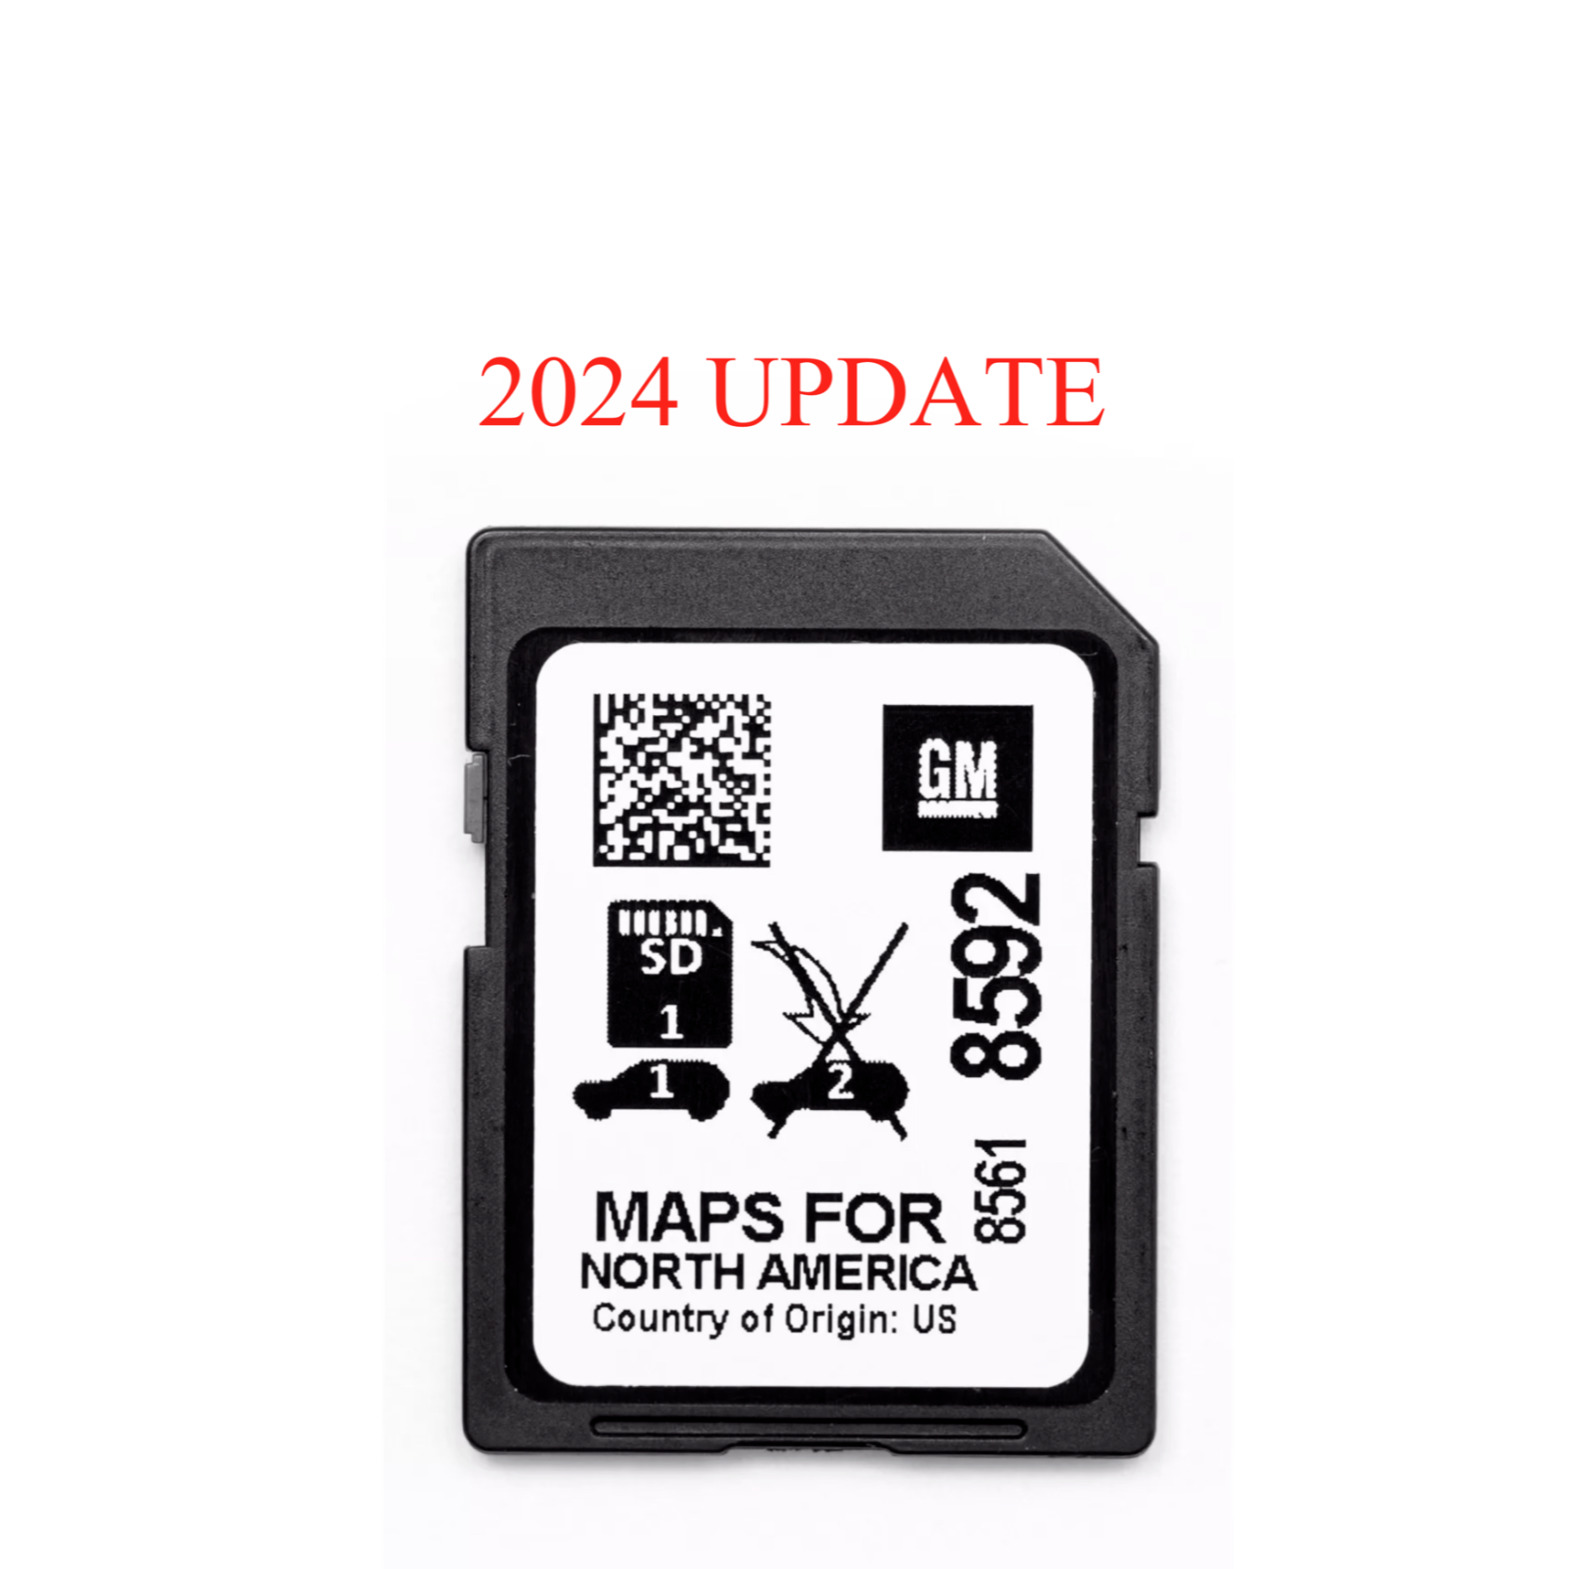 BRAND NEW MAP UPDATE GPS Navigation SD Card 85618592 GM GMC CHEVY CADILLAC BUICK